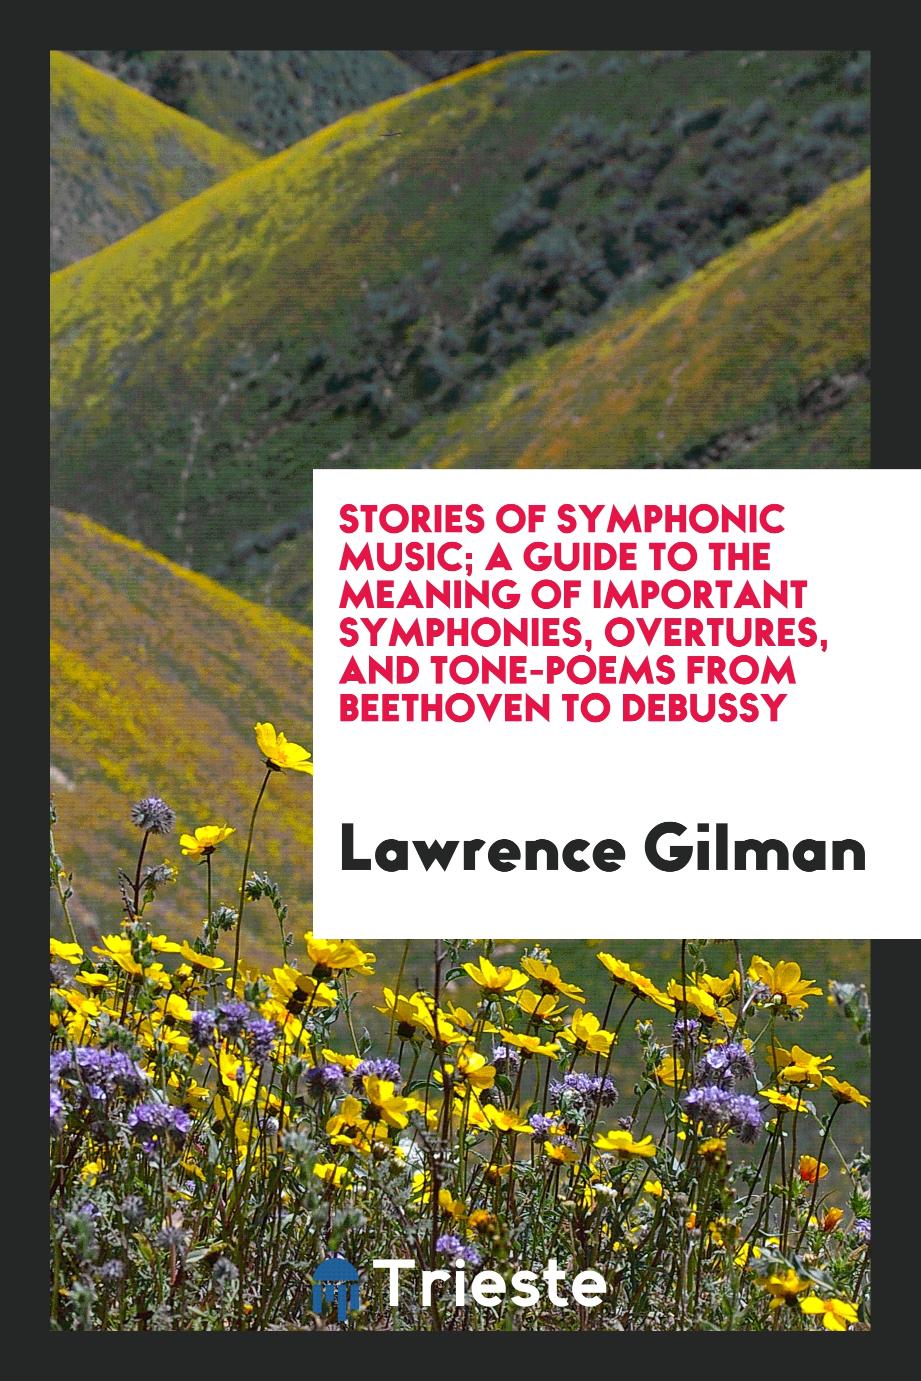 Lawrence Gilman - Stories of Symphonic Music; A Guide to the Meaning of Important Symphonies, Overtures, and Tone-Poems from Beethoven to Debussy